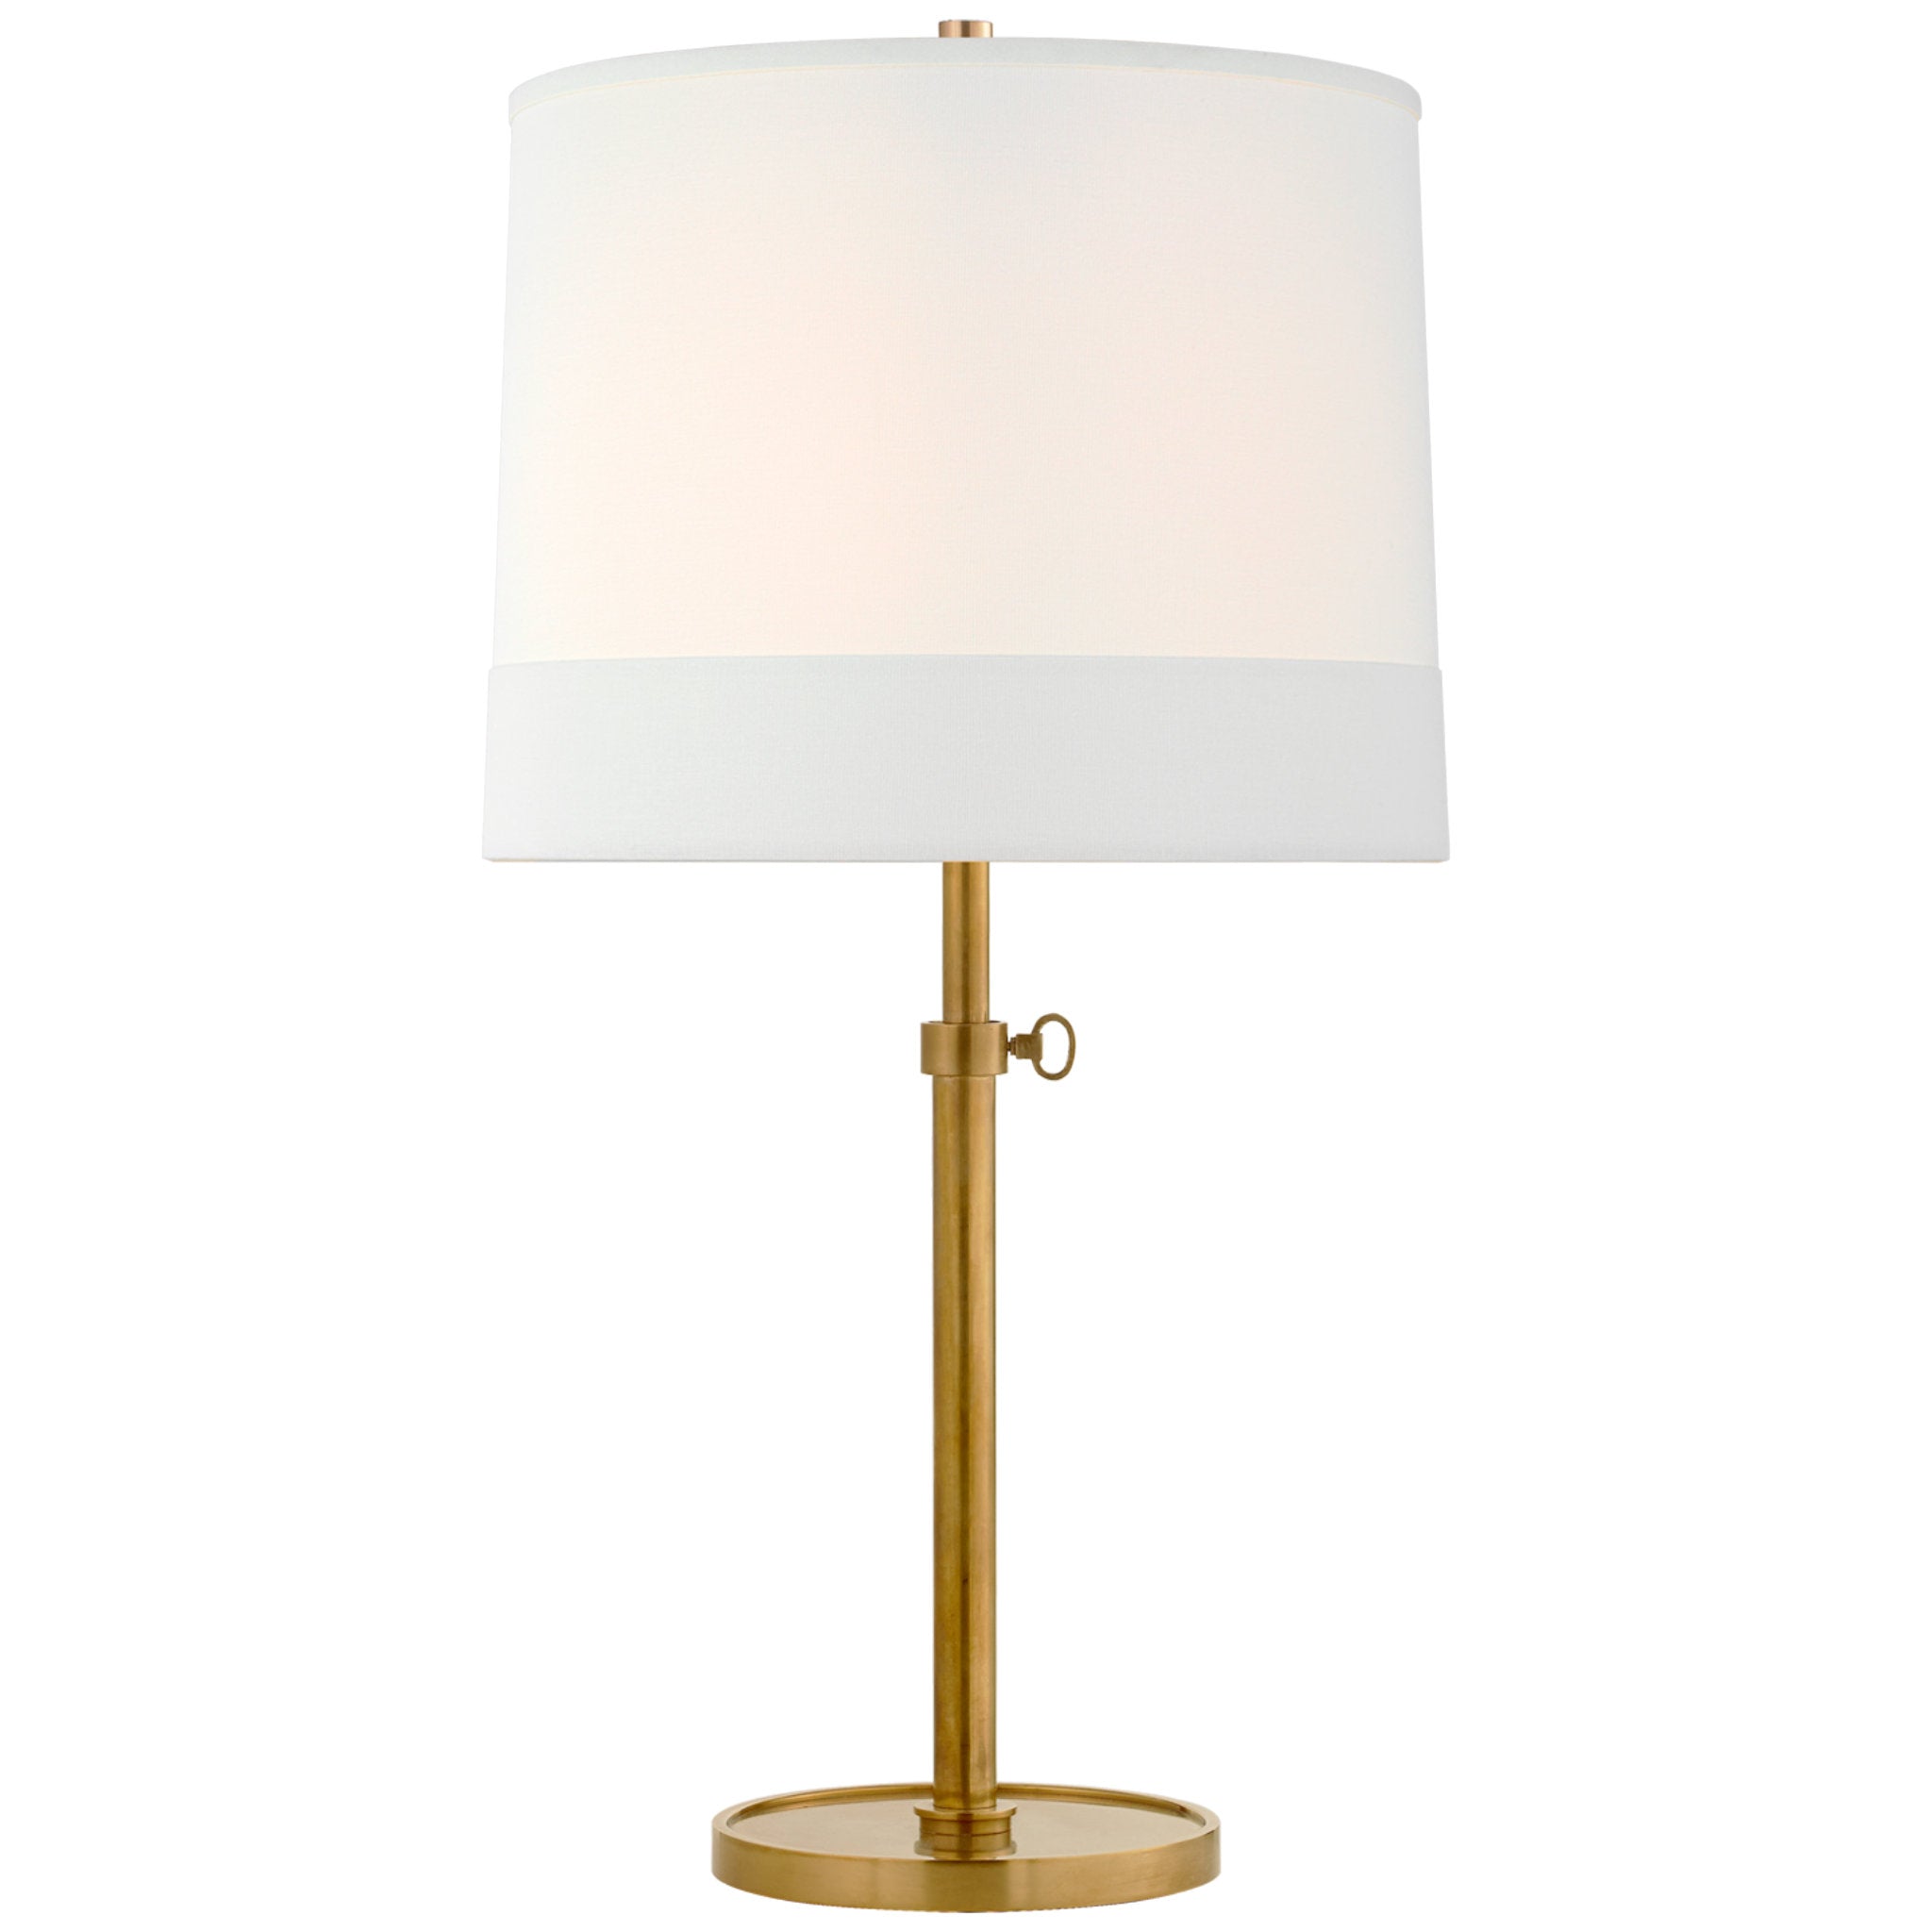 Barbara Barry Simple Adjustable Table Lamp in Soft Brass with Banded Linen Shade